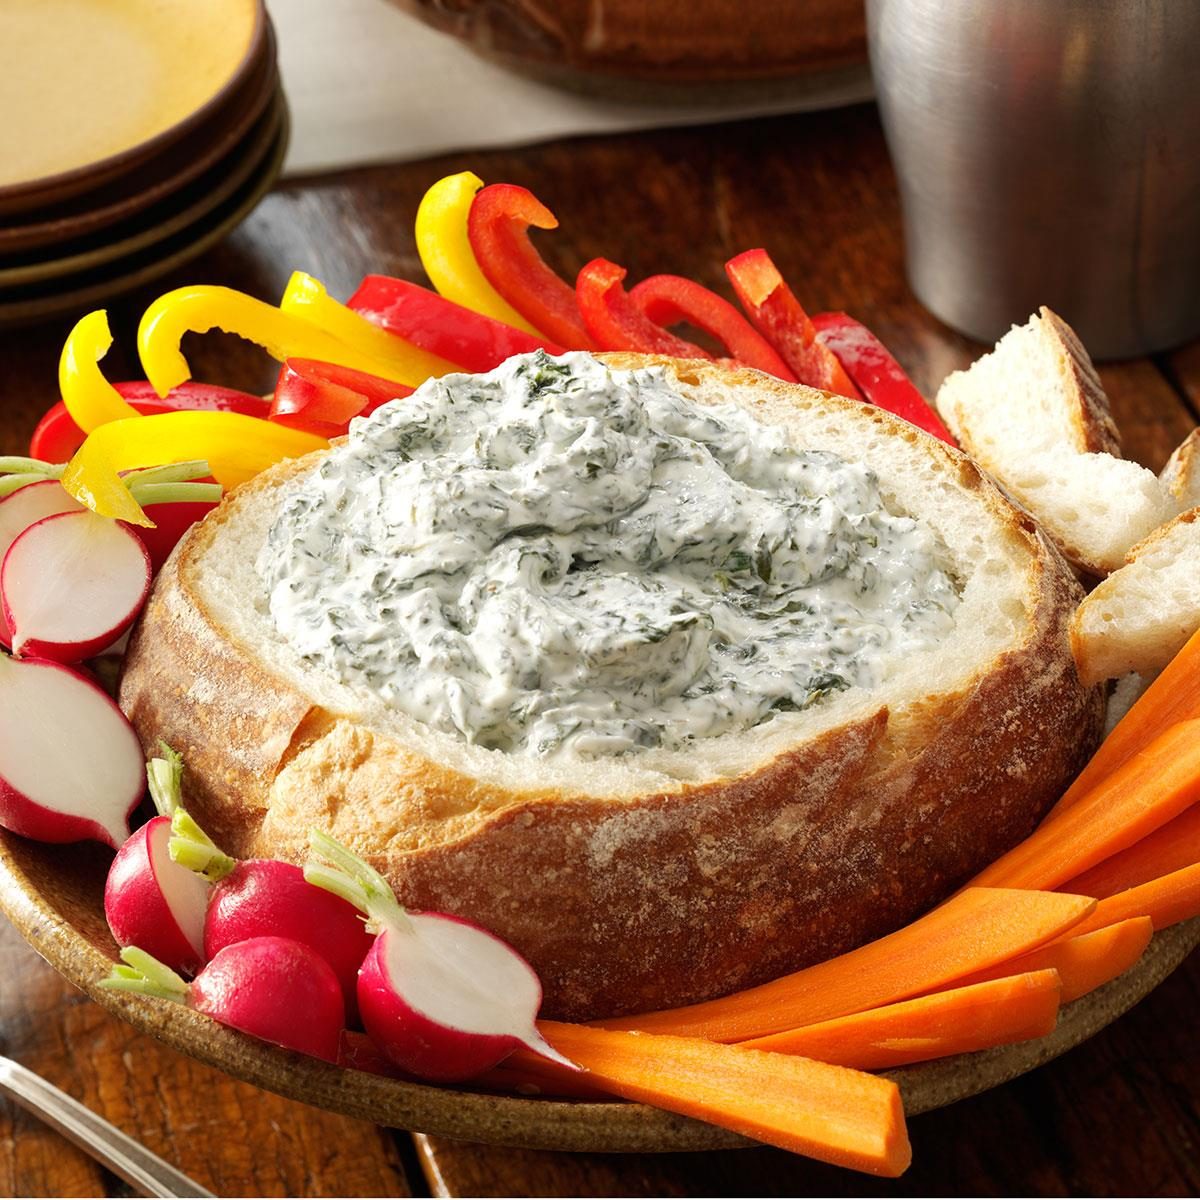 Spinach Dip in a Bread Bowl Recipe: How to Make It